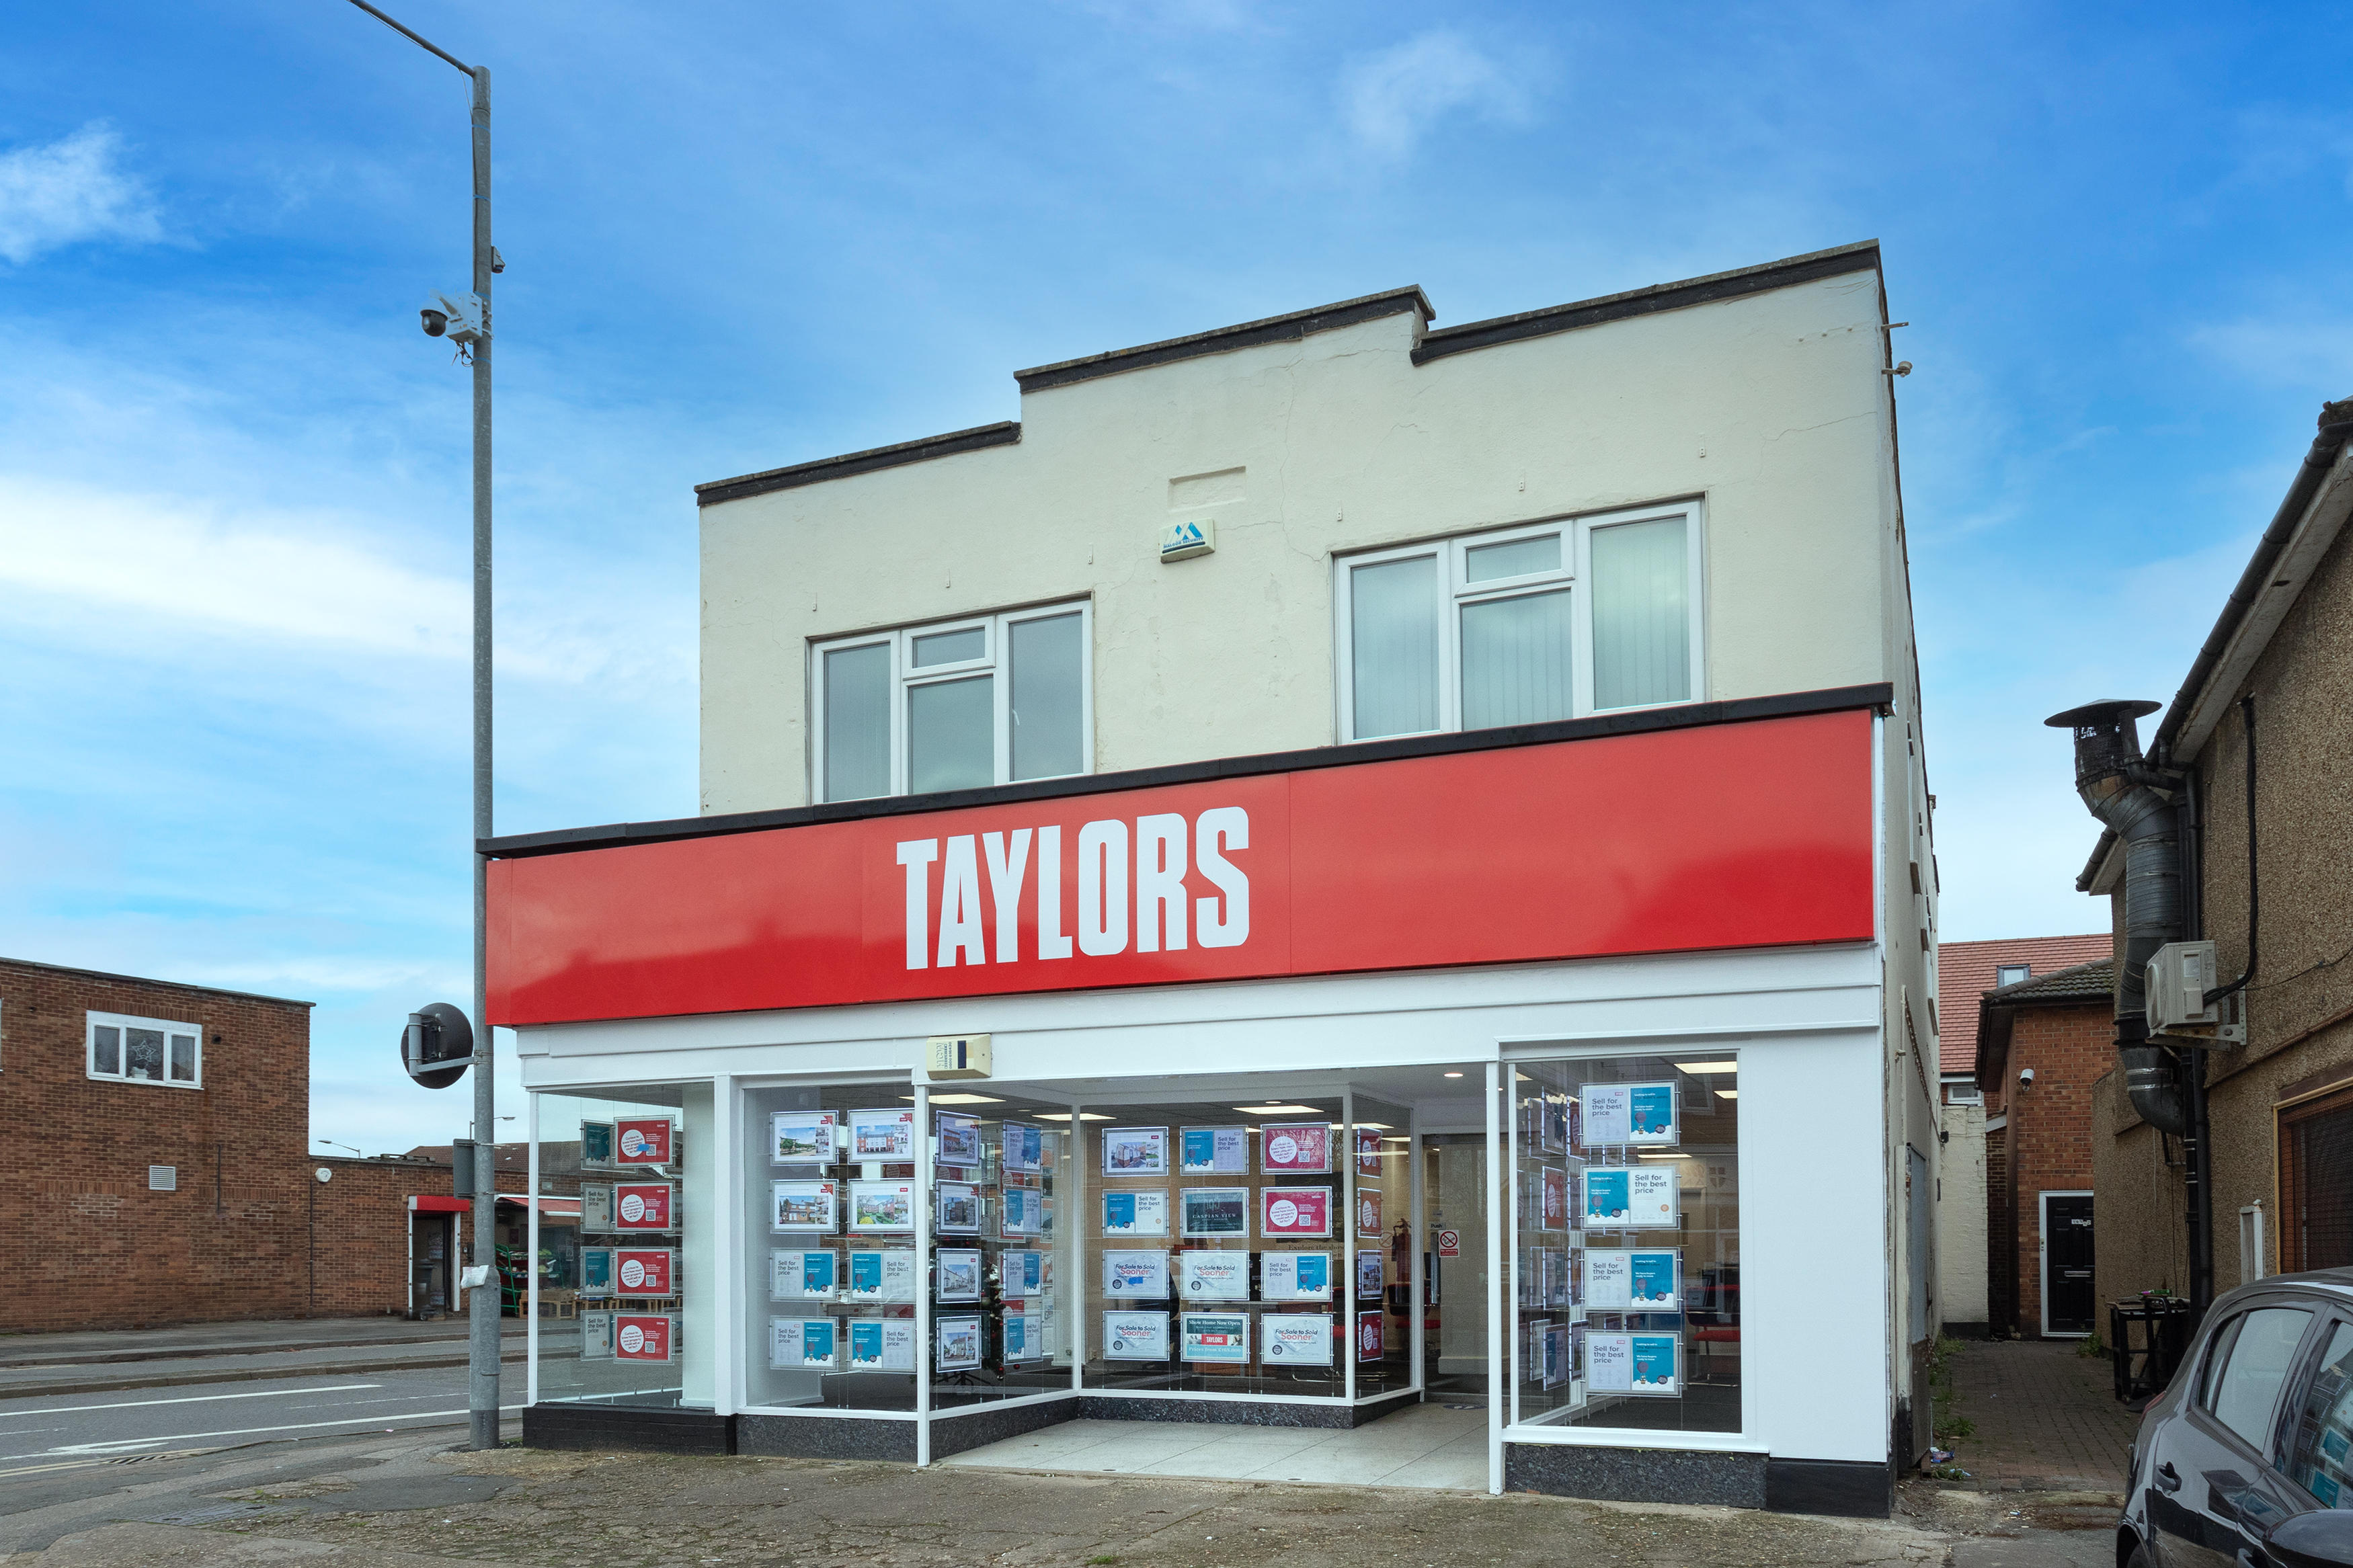 Taylors Sales and Letting Agents Bletchley Milton Keynes 01908 465823